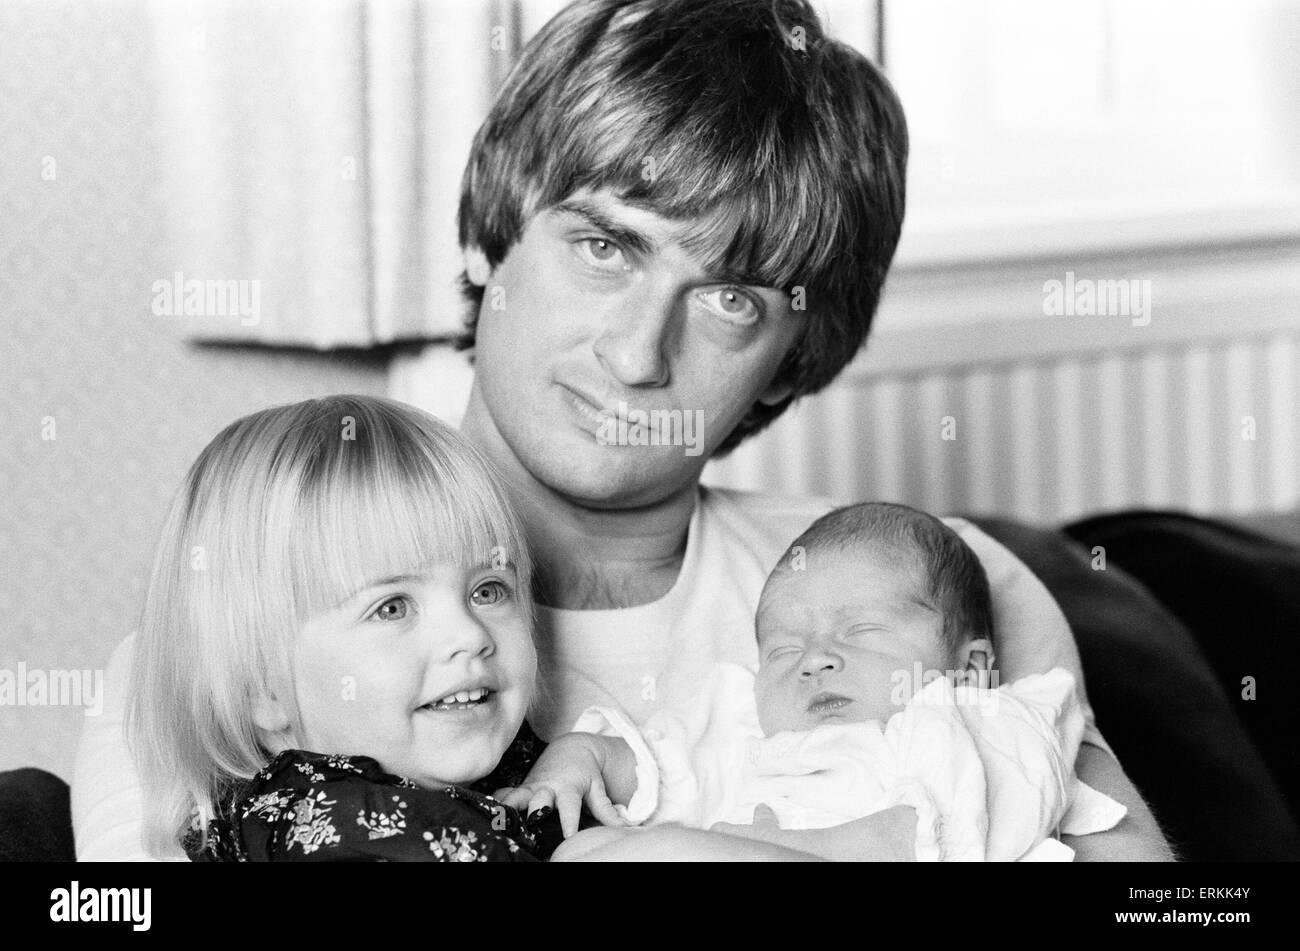 Mike Oldfield, musician and composer, pictured at home with family, eldest daughter Molly and baby son Dougal, Buckinghamshire, September 1981. Stock Photo